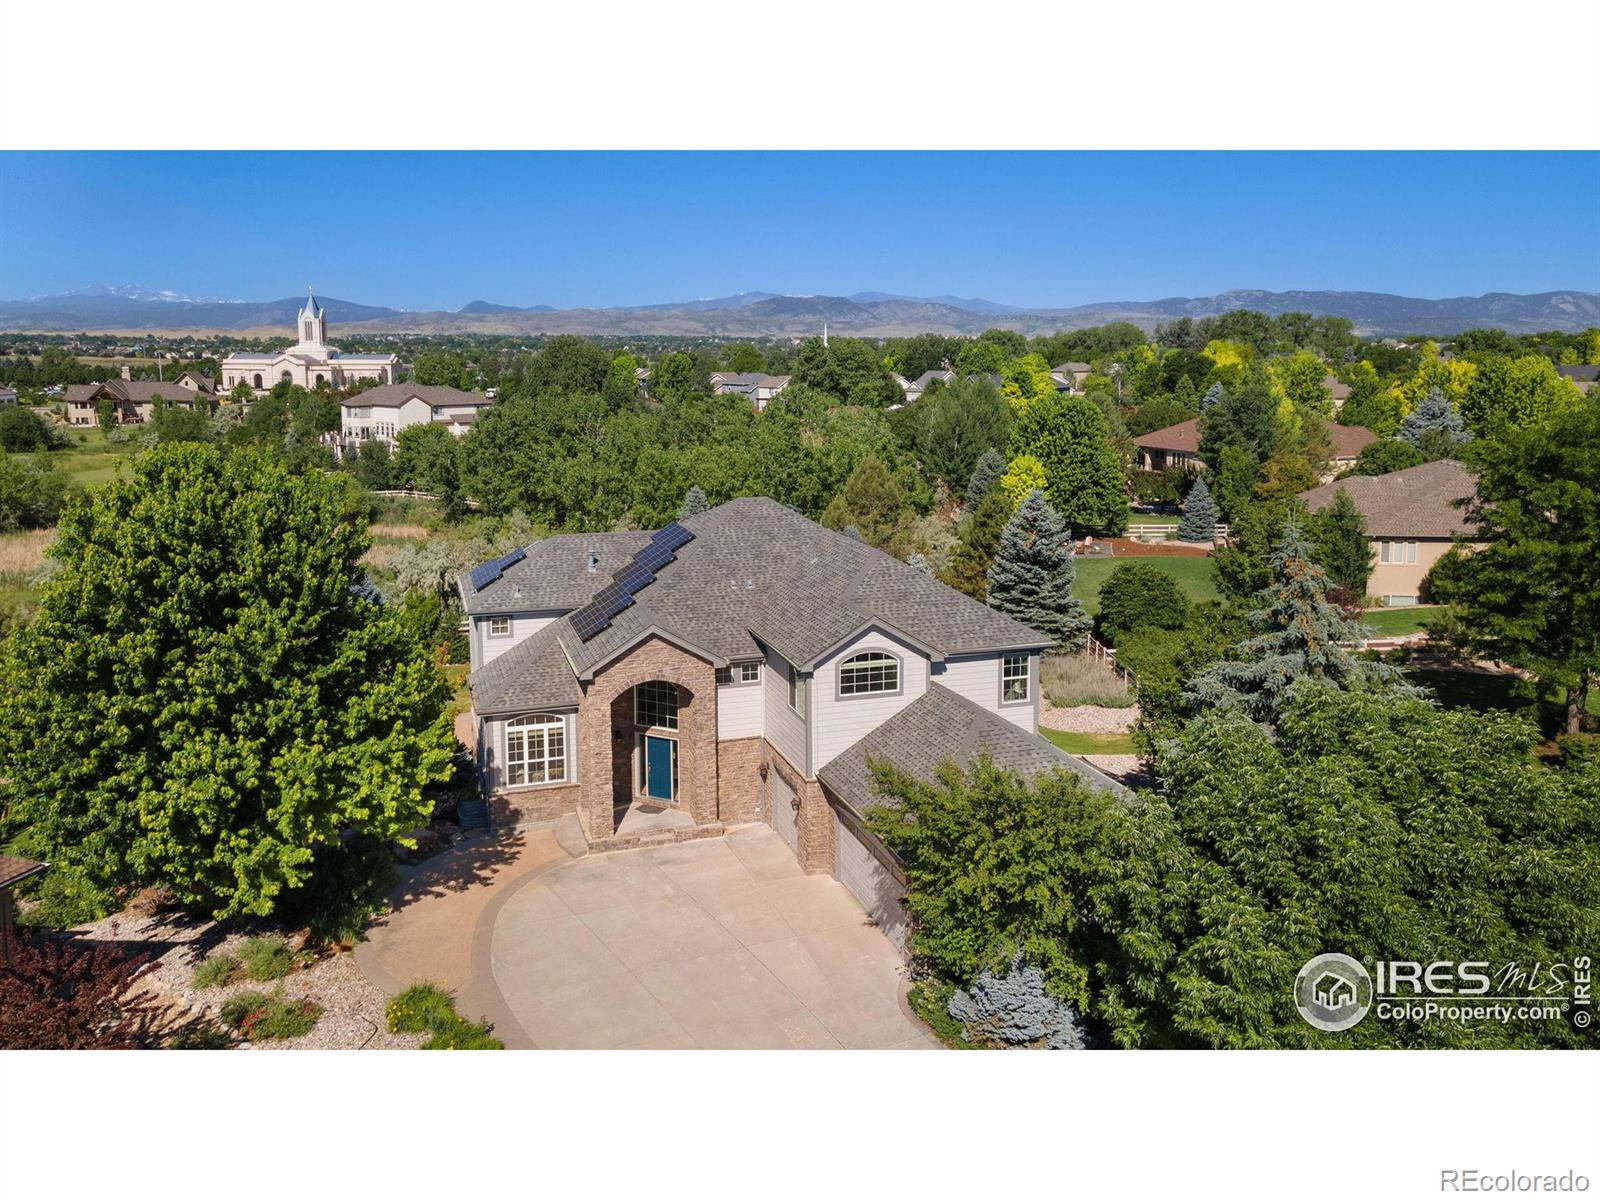 6509  Westchase Court, fort collins MLS: 4567891012175 Beds: 4 Baths: 4 Price: $1,575,000